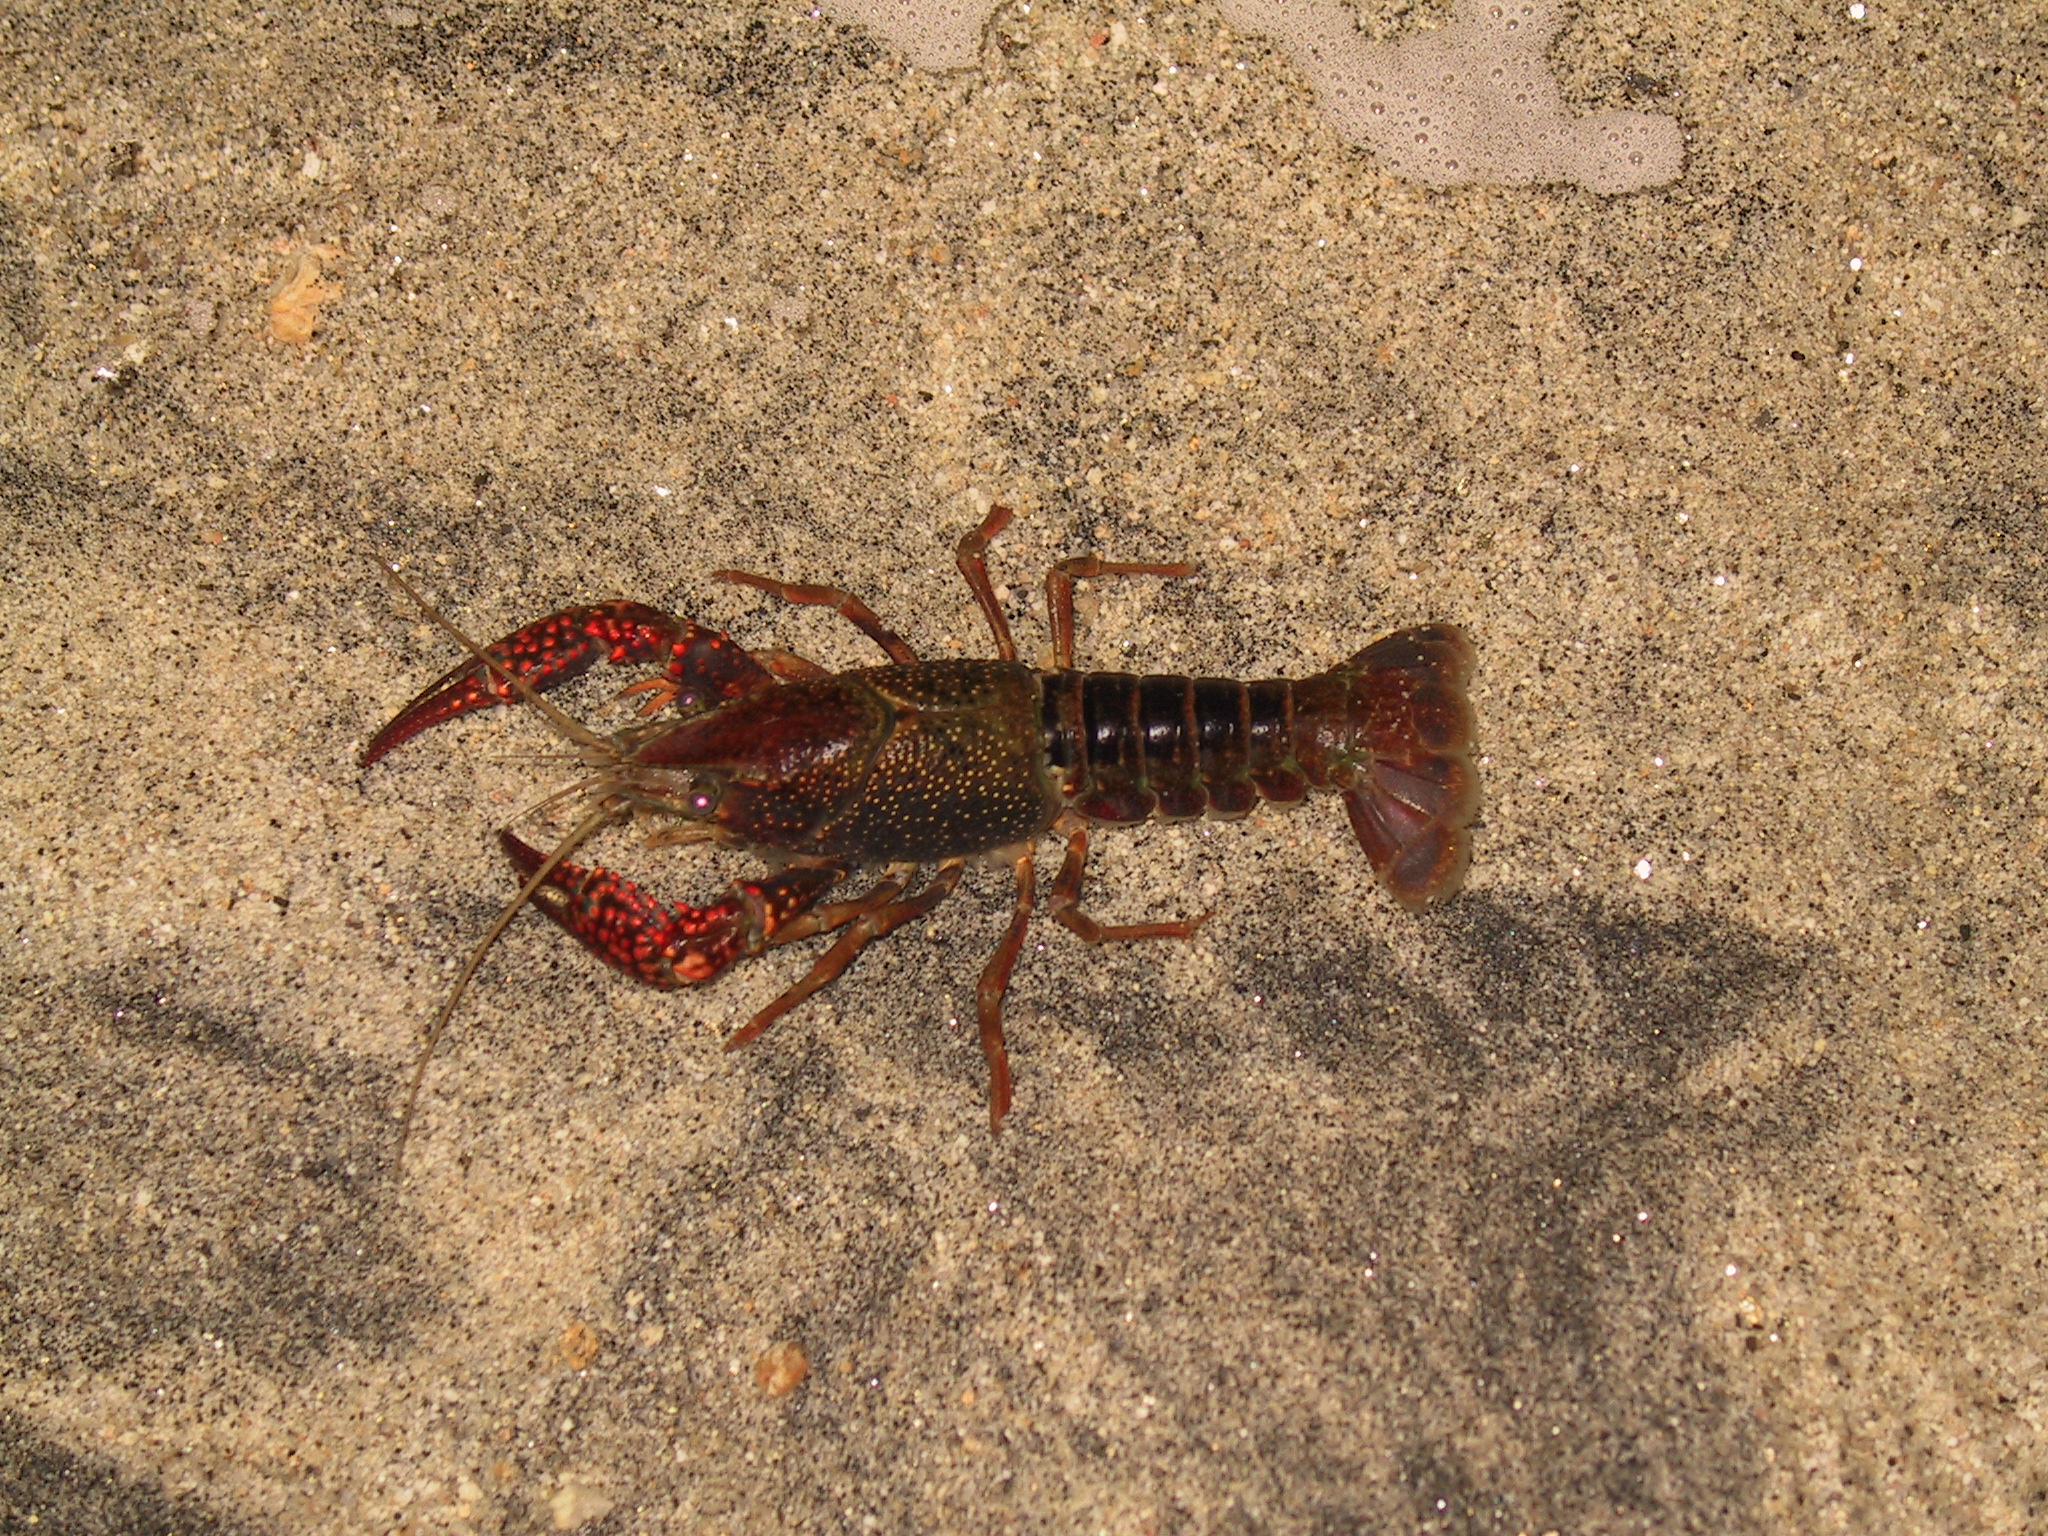 Swamp crayfish<br />Photo by: USGS